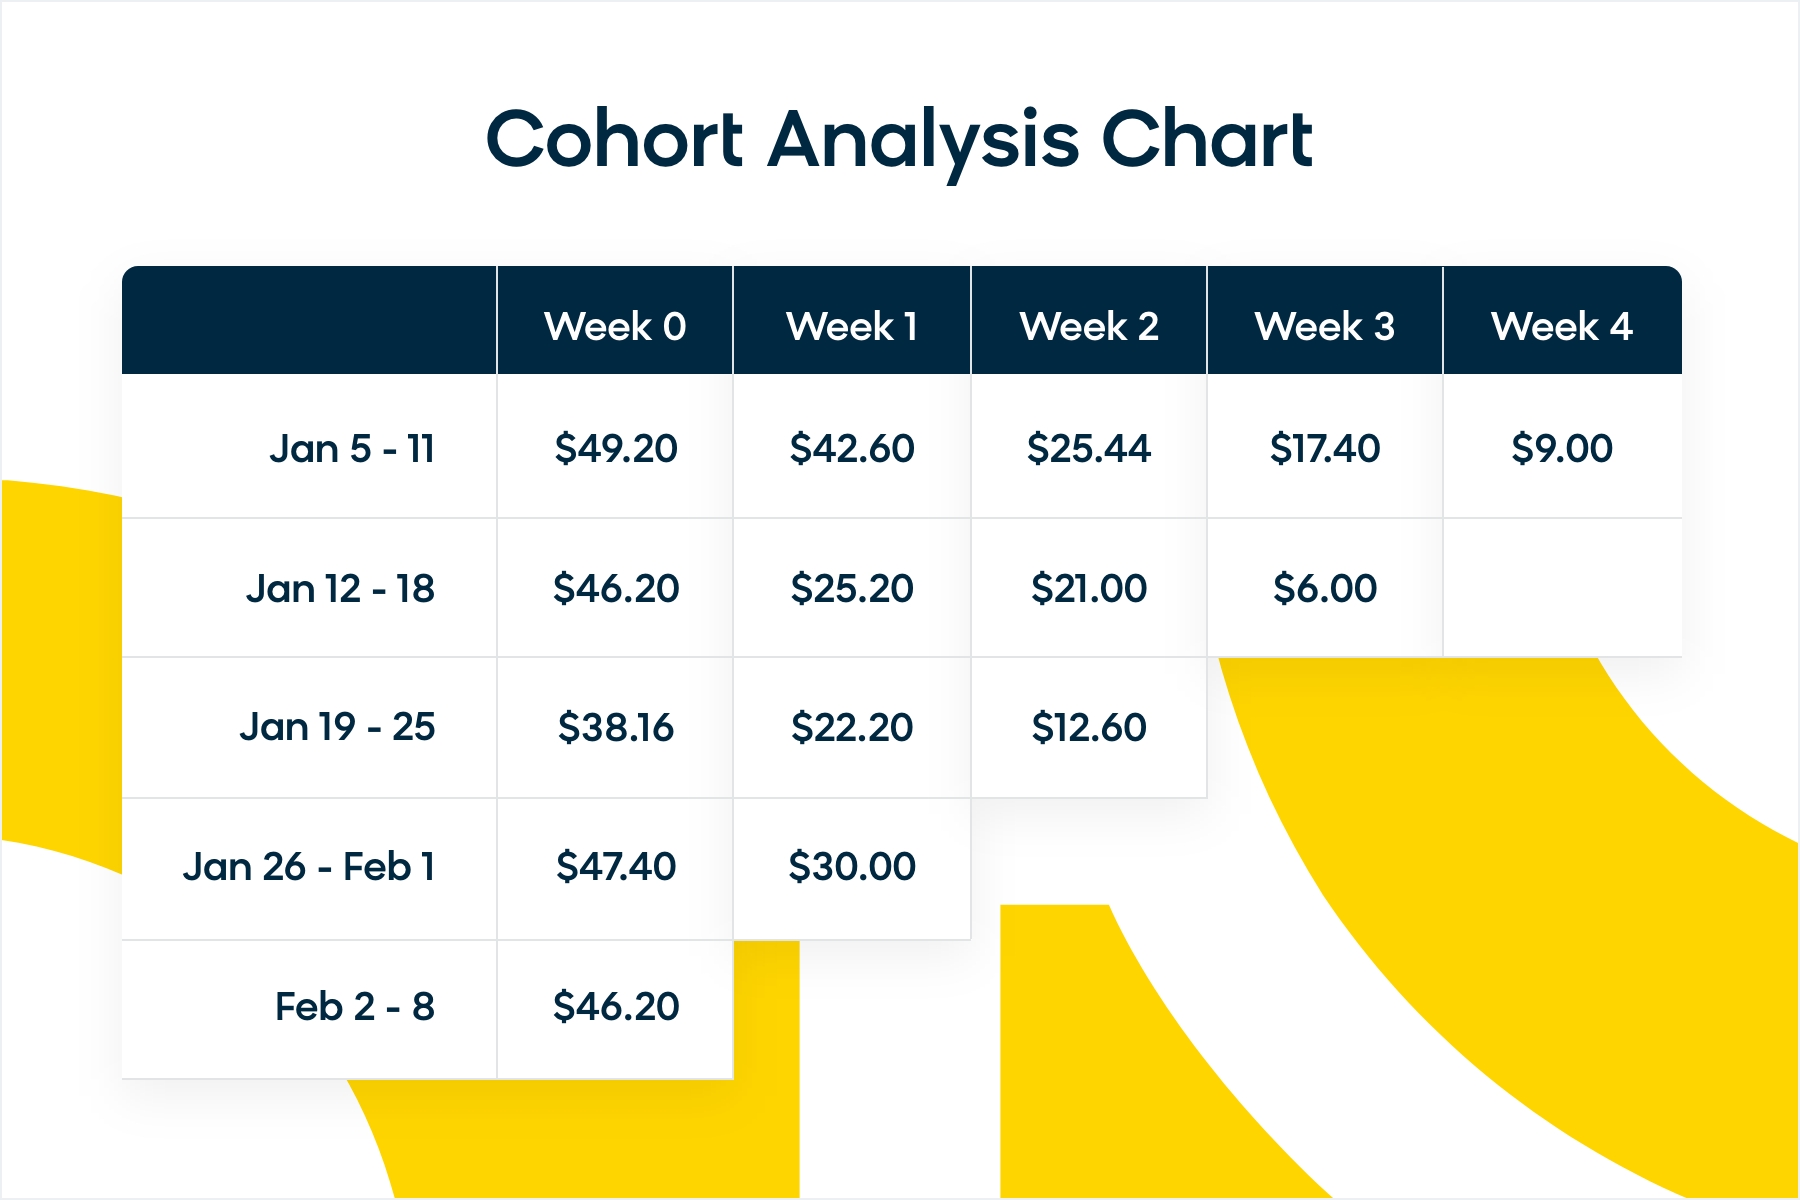 An example of a cohort analysis chart